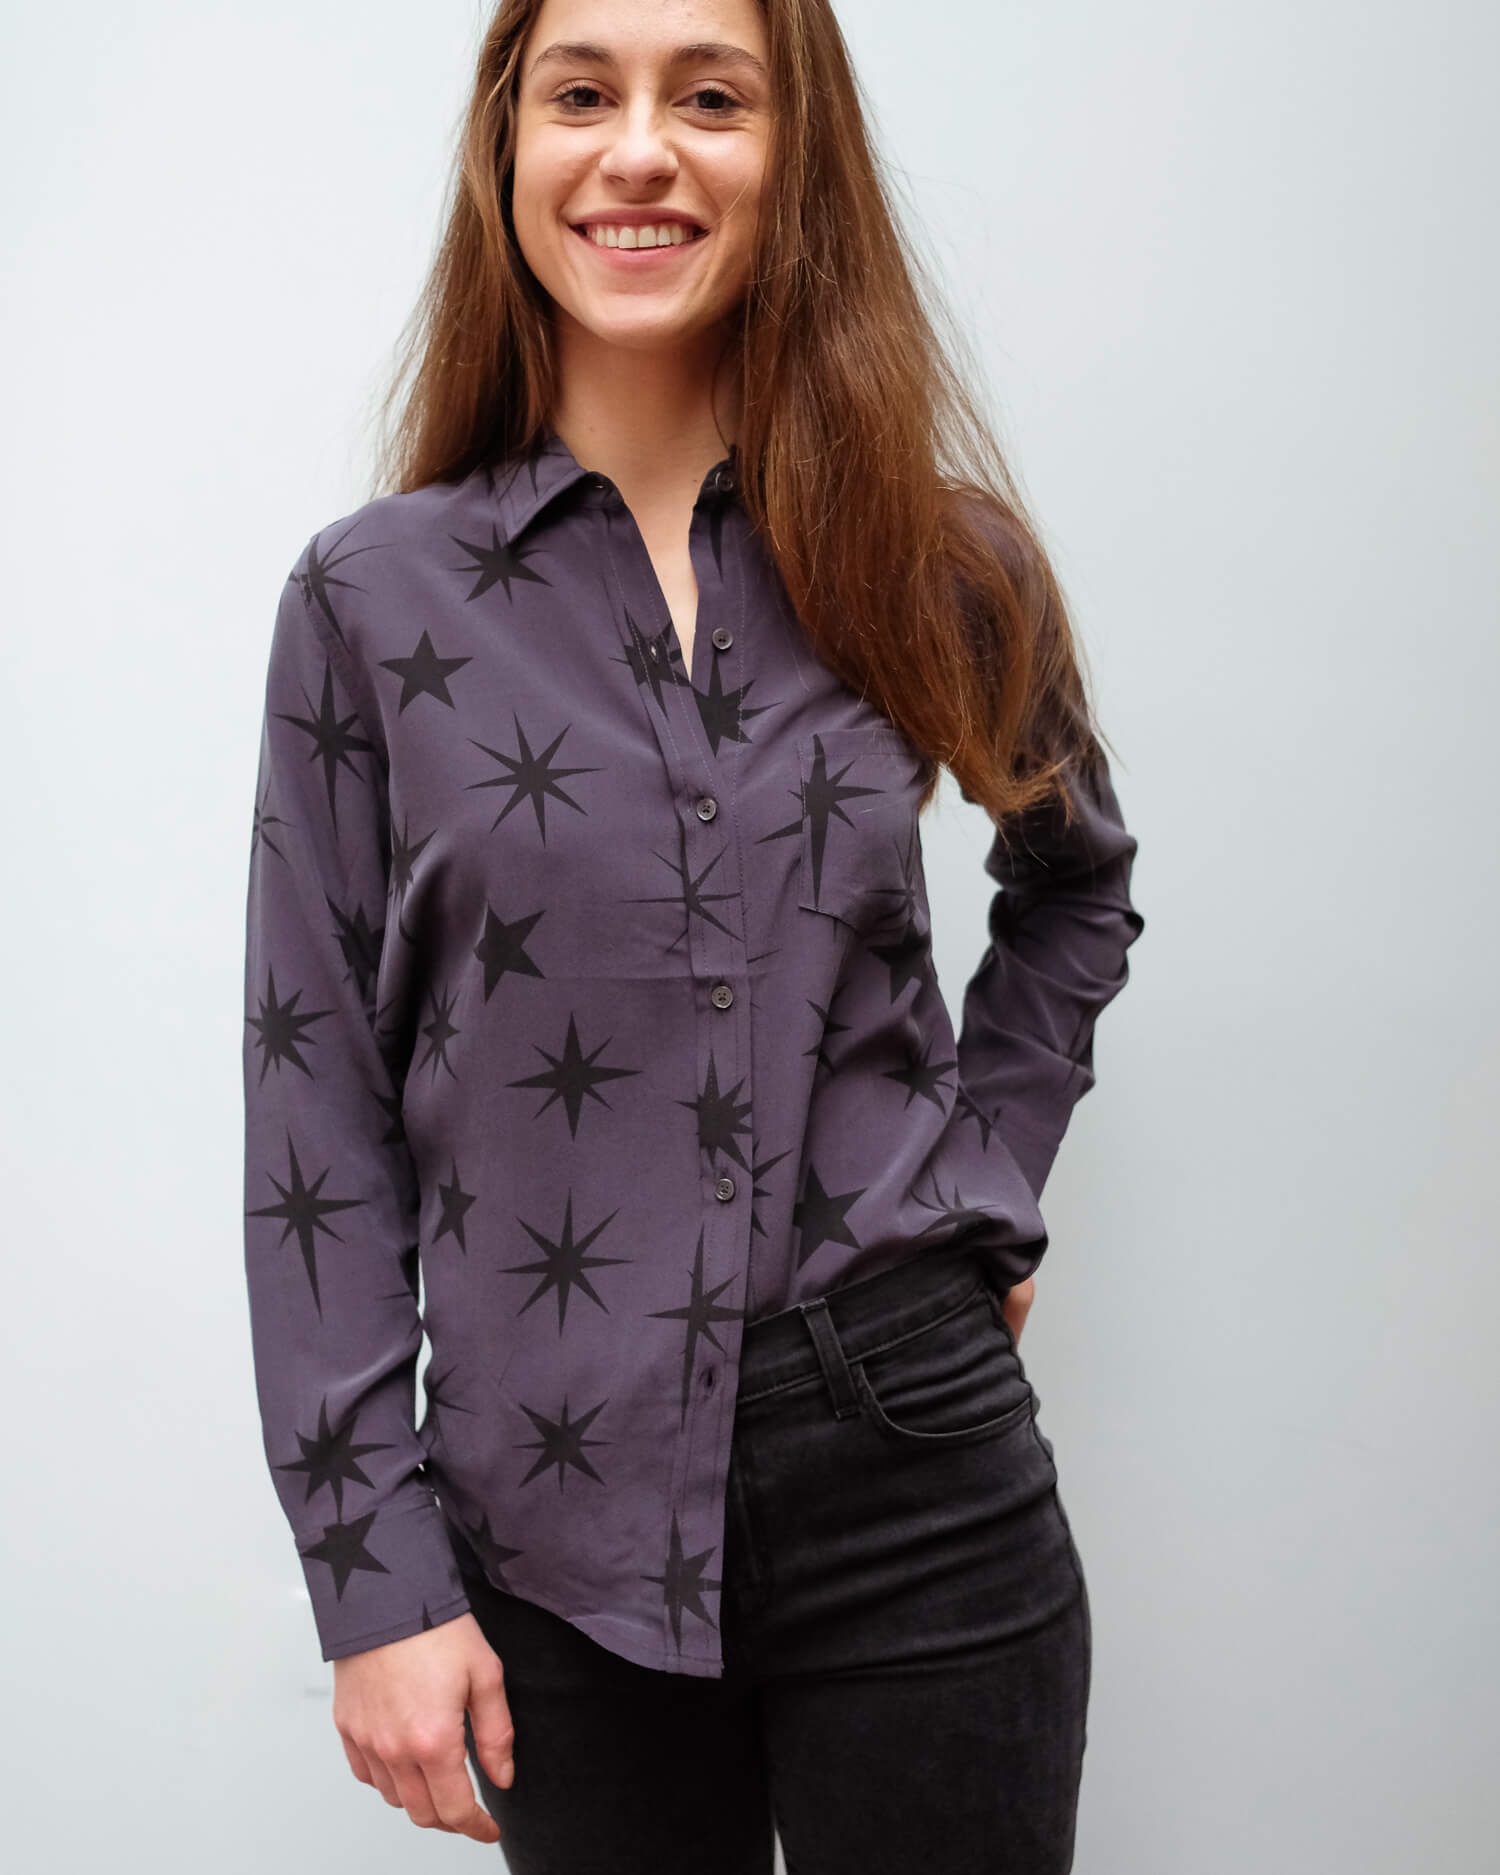 R Kate shirt in charcoal constellations